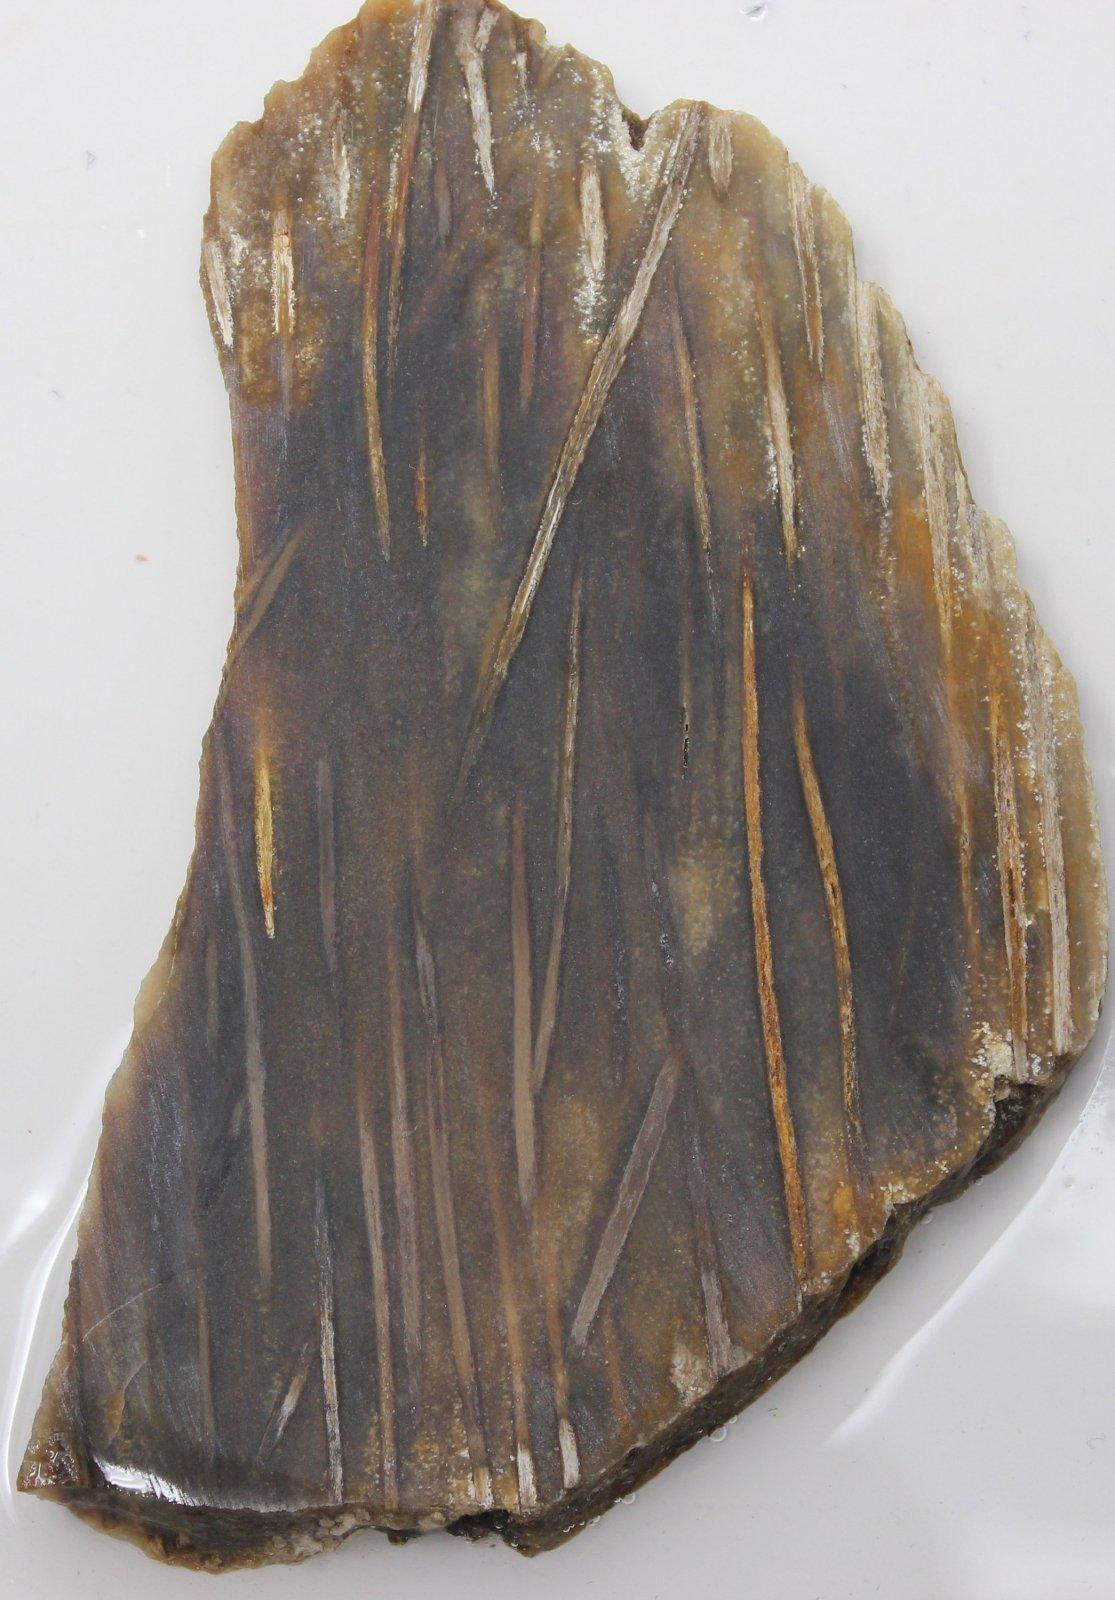 Indonesian Palm Root Slab!  Lapidary Stone Slab!  Fossilized Petrified Wood Slab! - LapidaryCentral